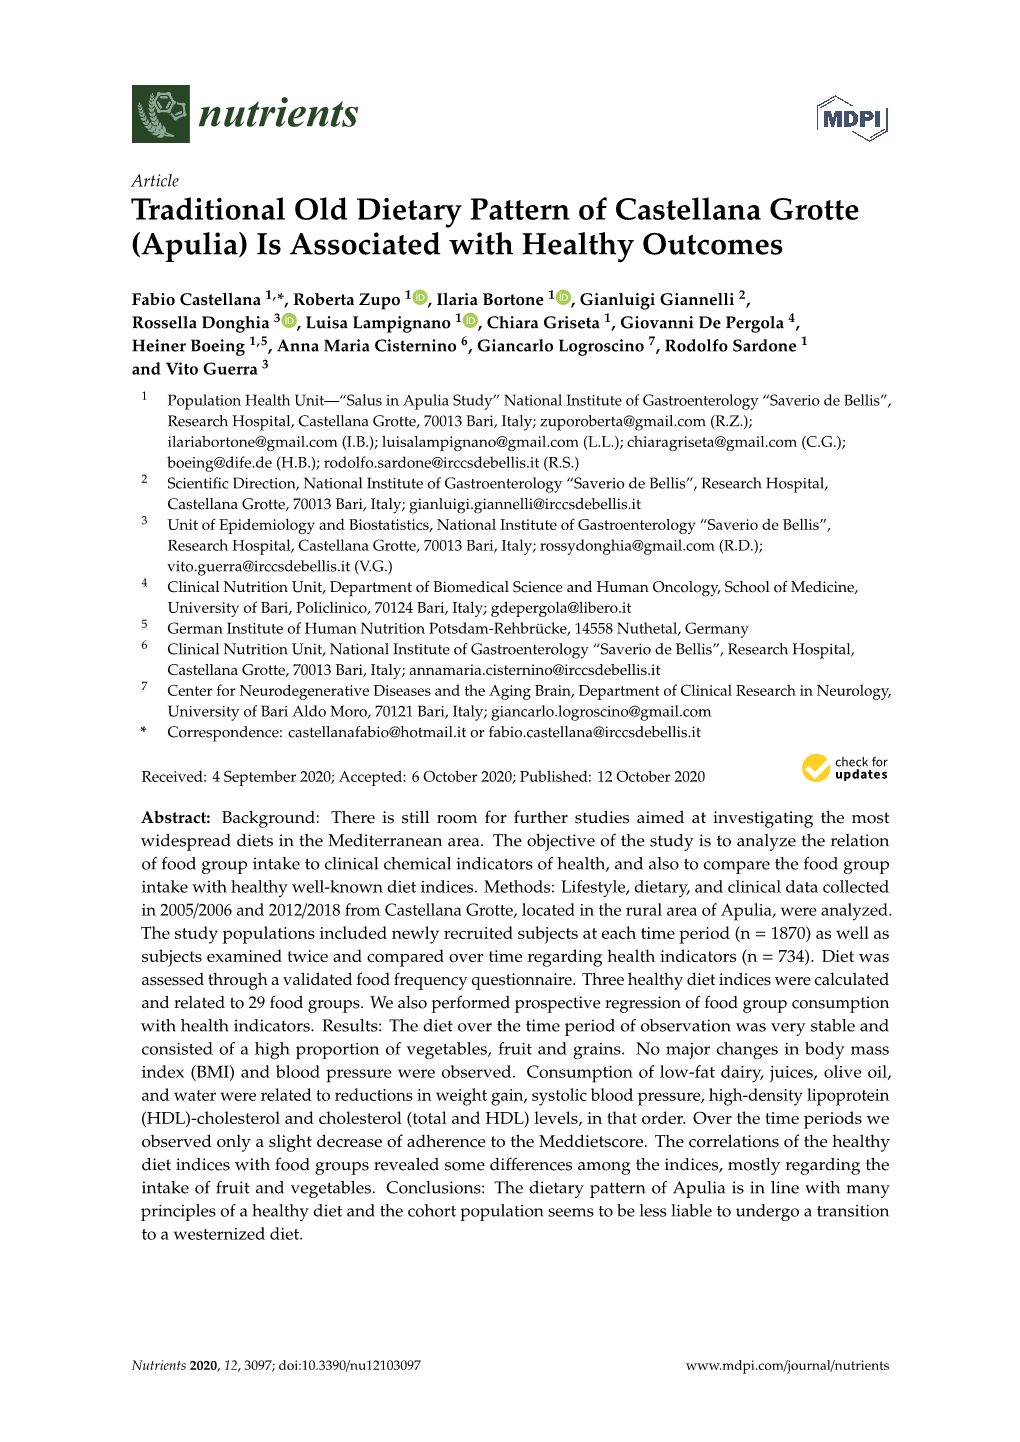 Traditional Old Dietary Pattern of Castellana Grotte (Apulia) Is Associated with Healthy Outcomes